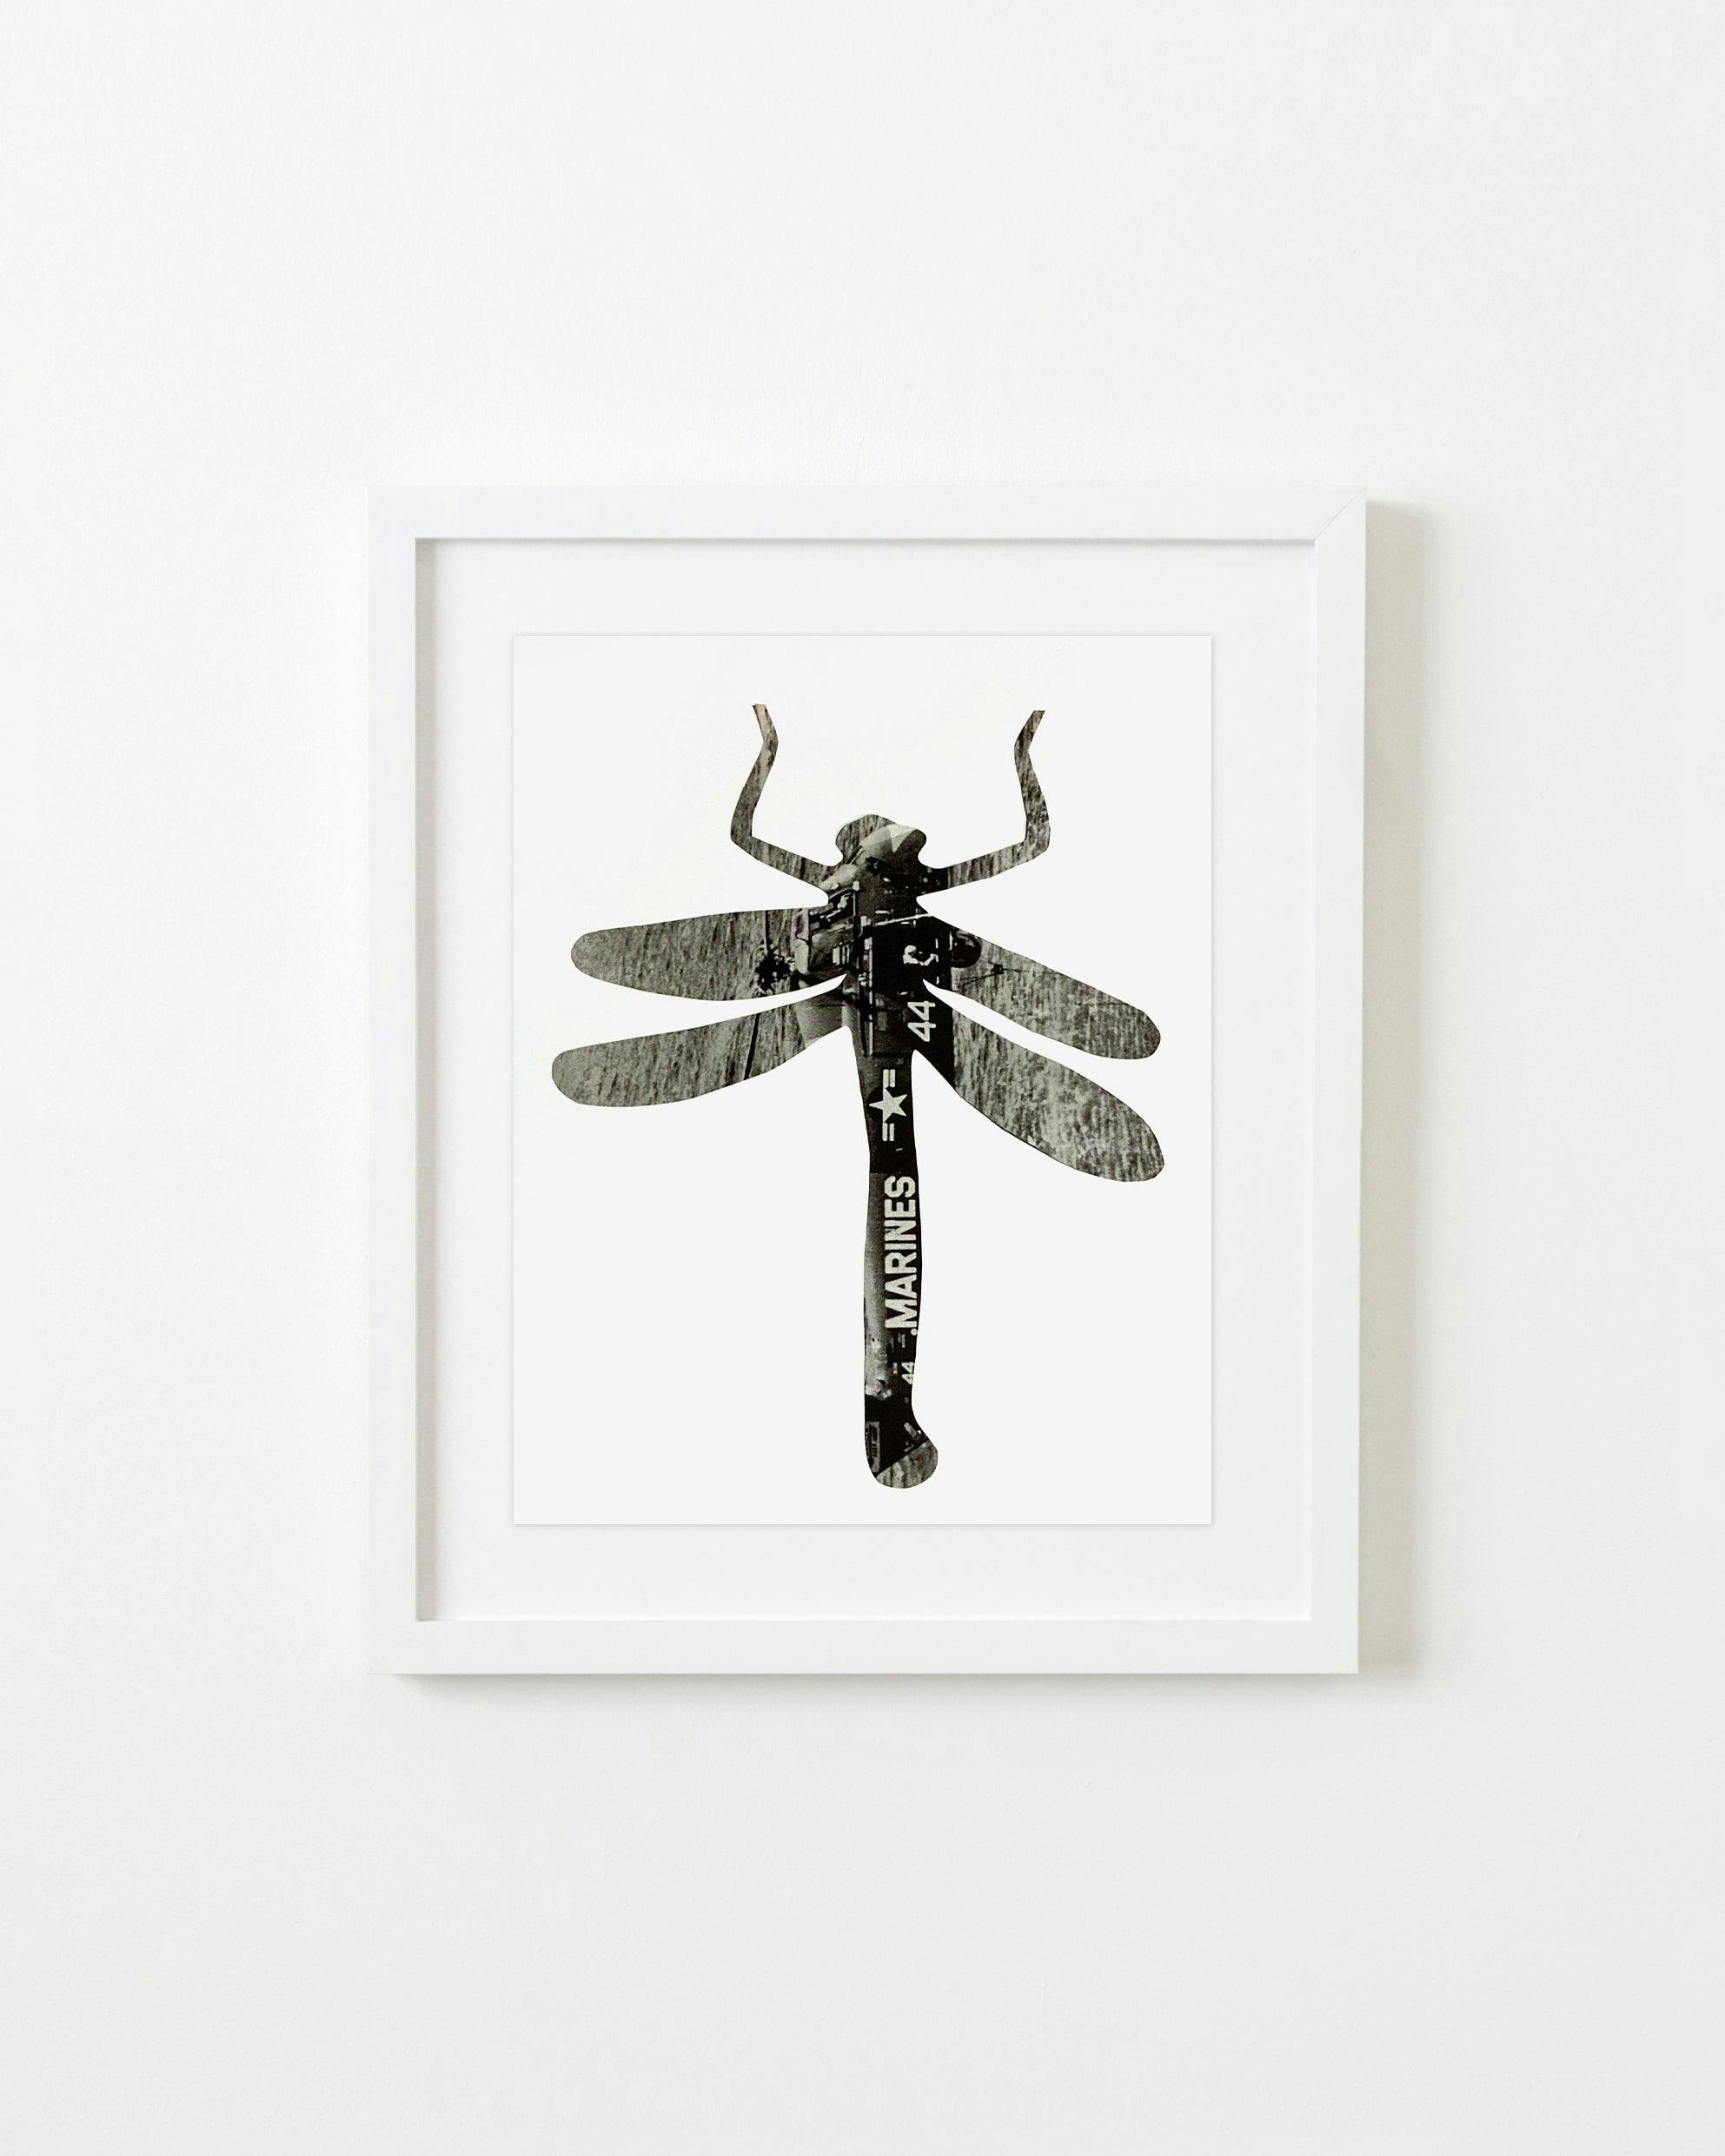 Mixed Media by Jessica Sinks titled "Dragonfly".